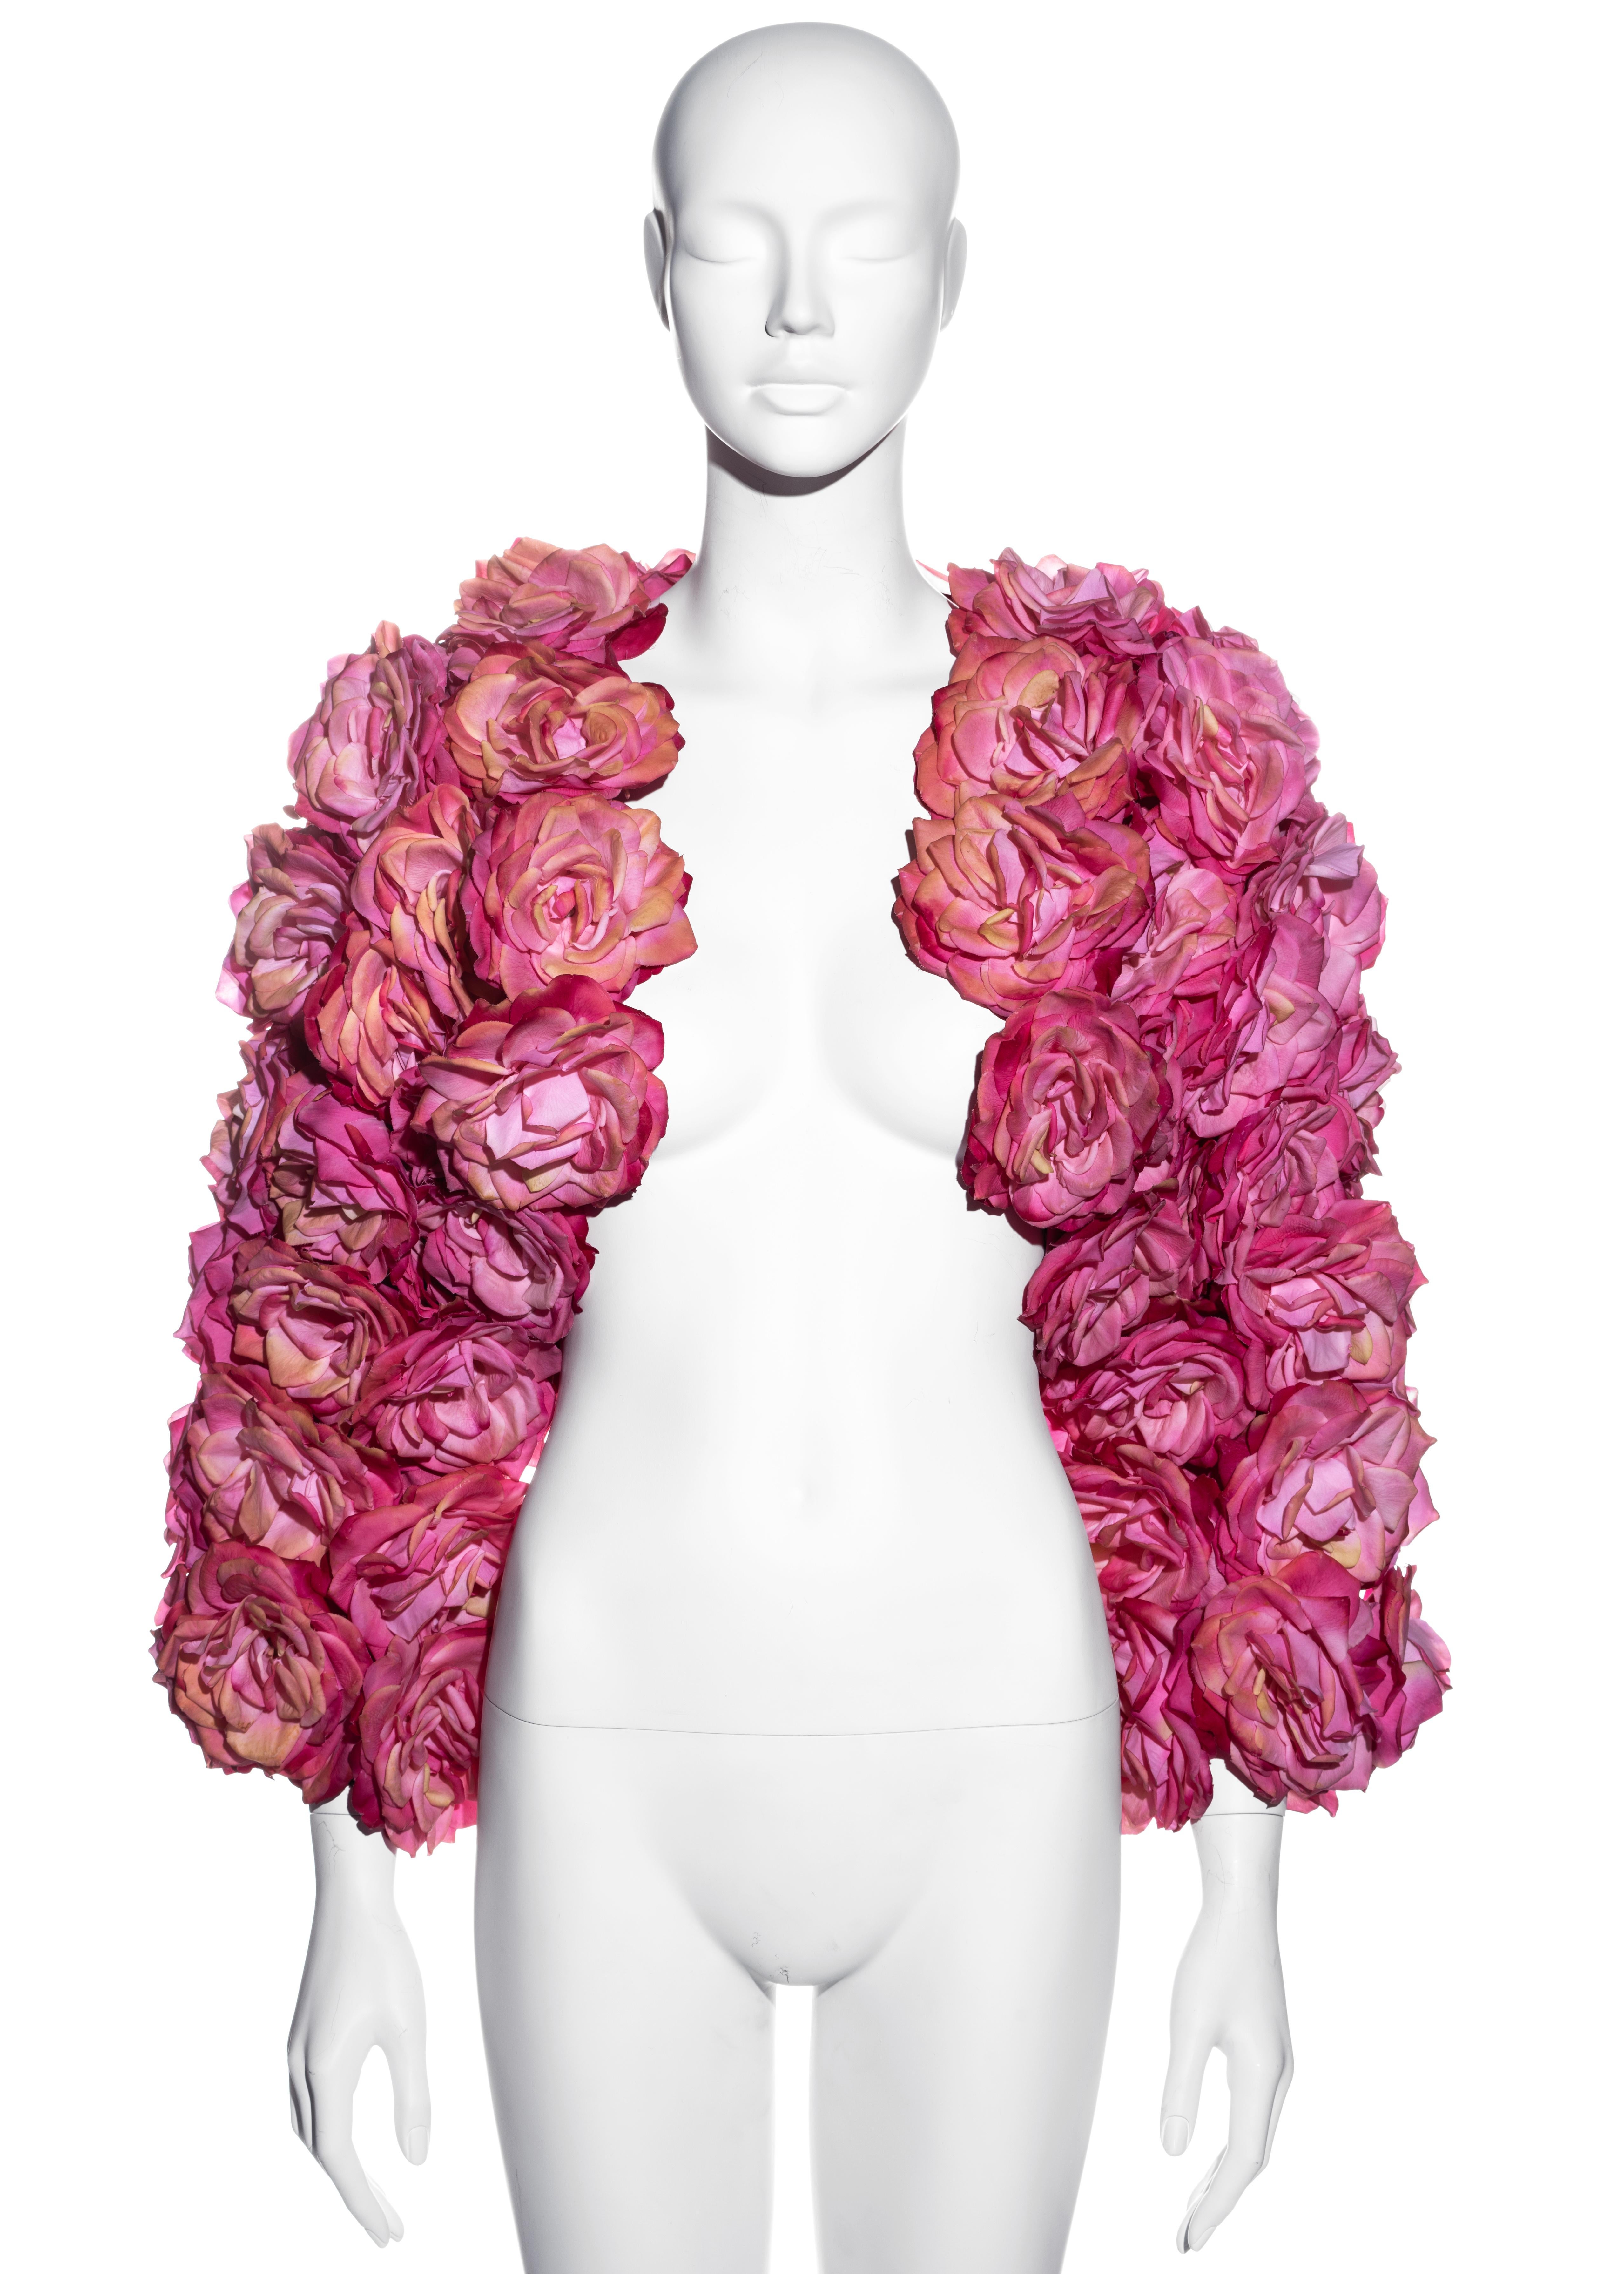 ▪ Rachel London pink rose bolero jacket
▪ Adorned with large pink faux roses 
▪ Seen on Madonna at the 1988 Tony Awards and Rihanna for Garage Magazine, Sep 2018
▪ Size Small
▪ c. 1988